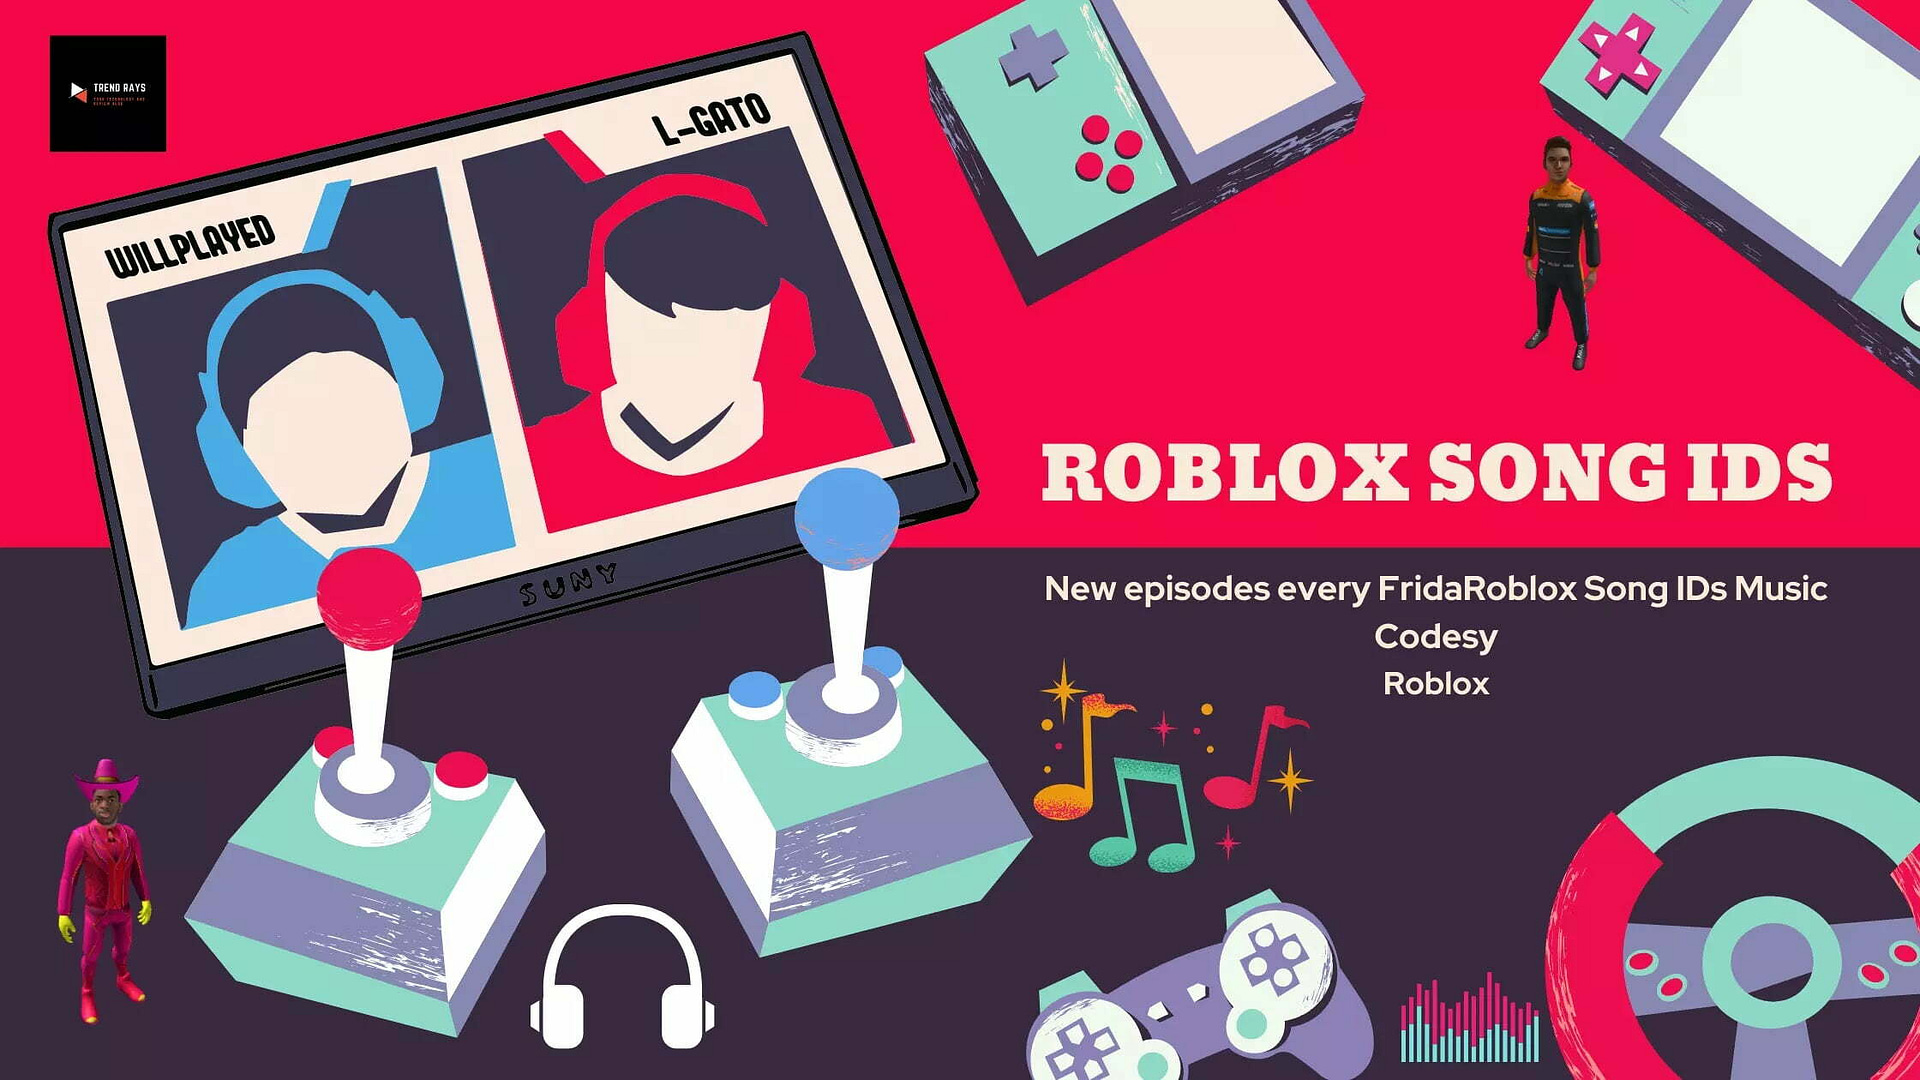 Roblox Song IDs